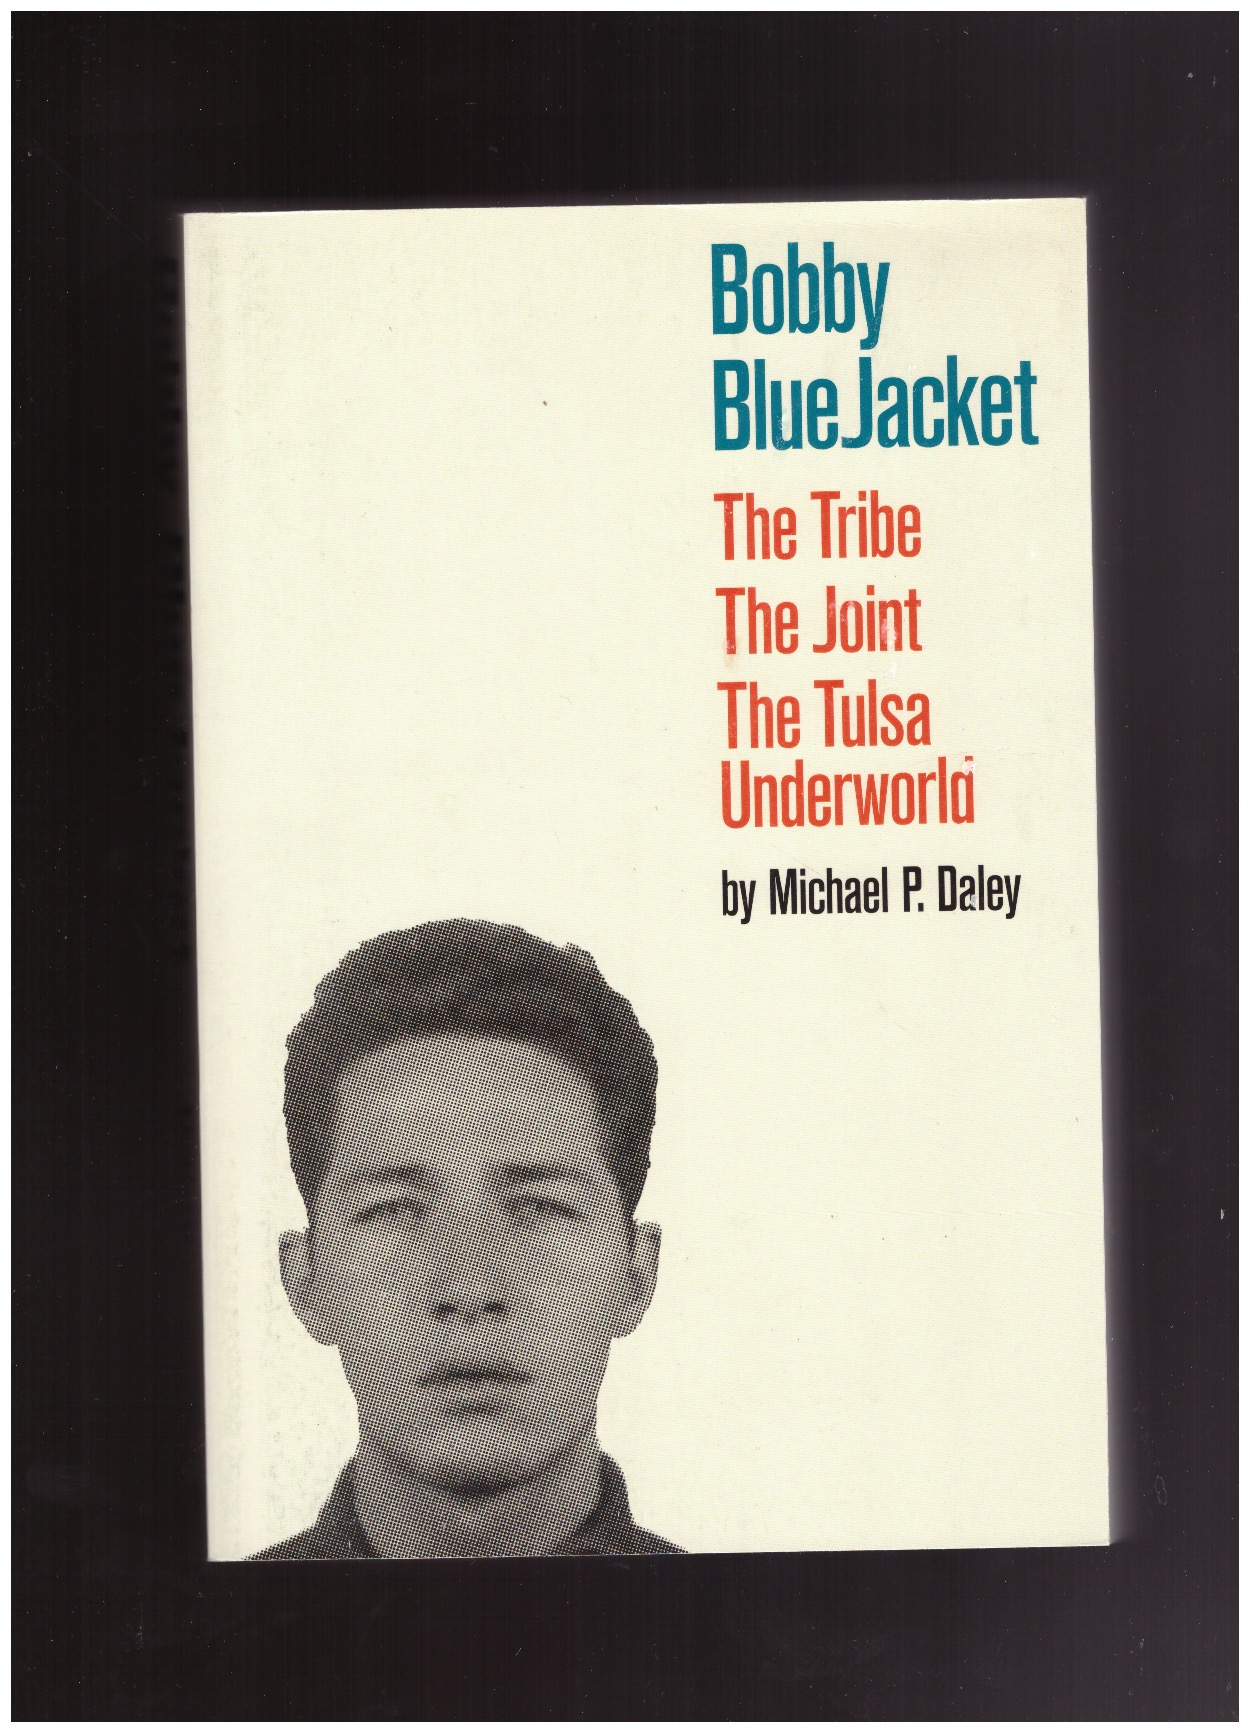 DALEY, Michael P. - Bobby BlueJacket: The Tribe, The Joint, The Tulsa Underworld